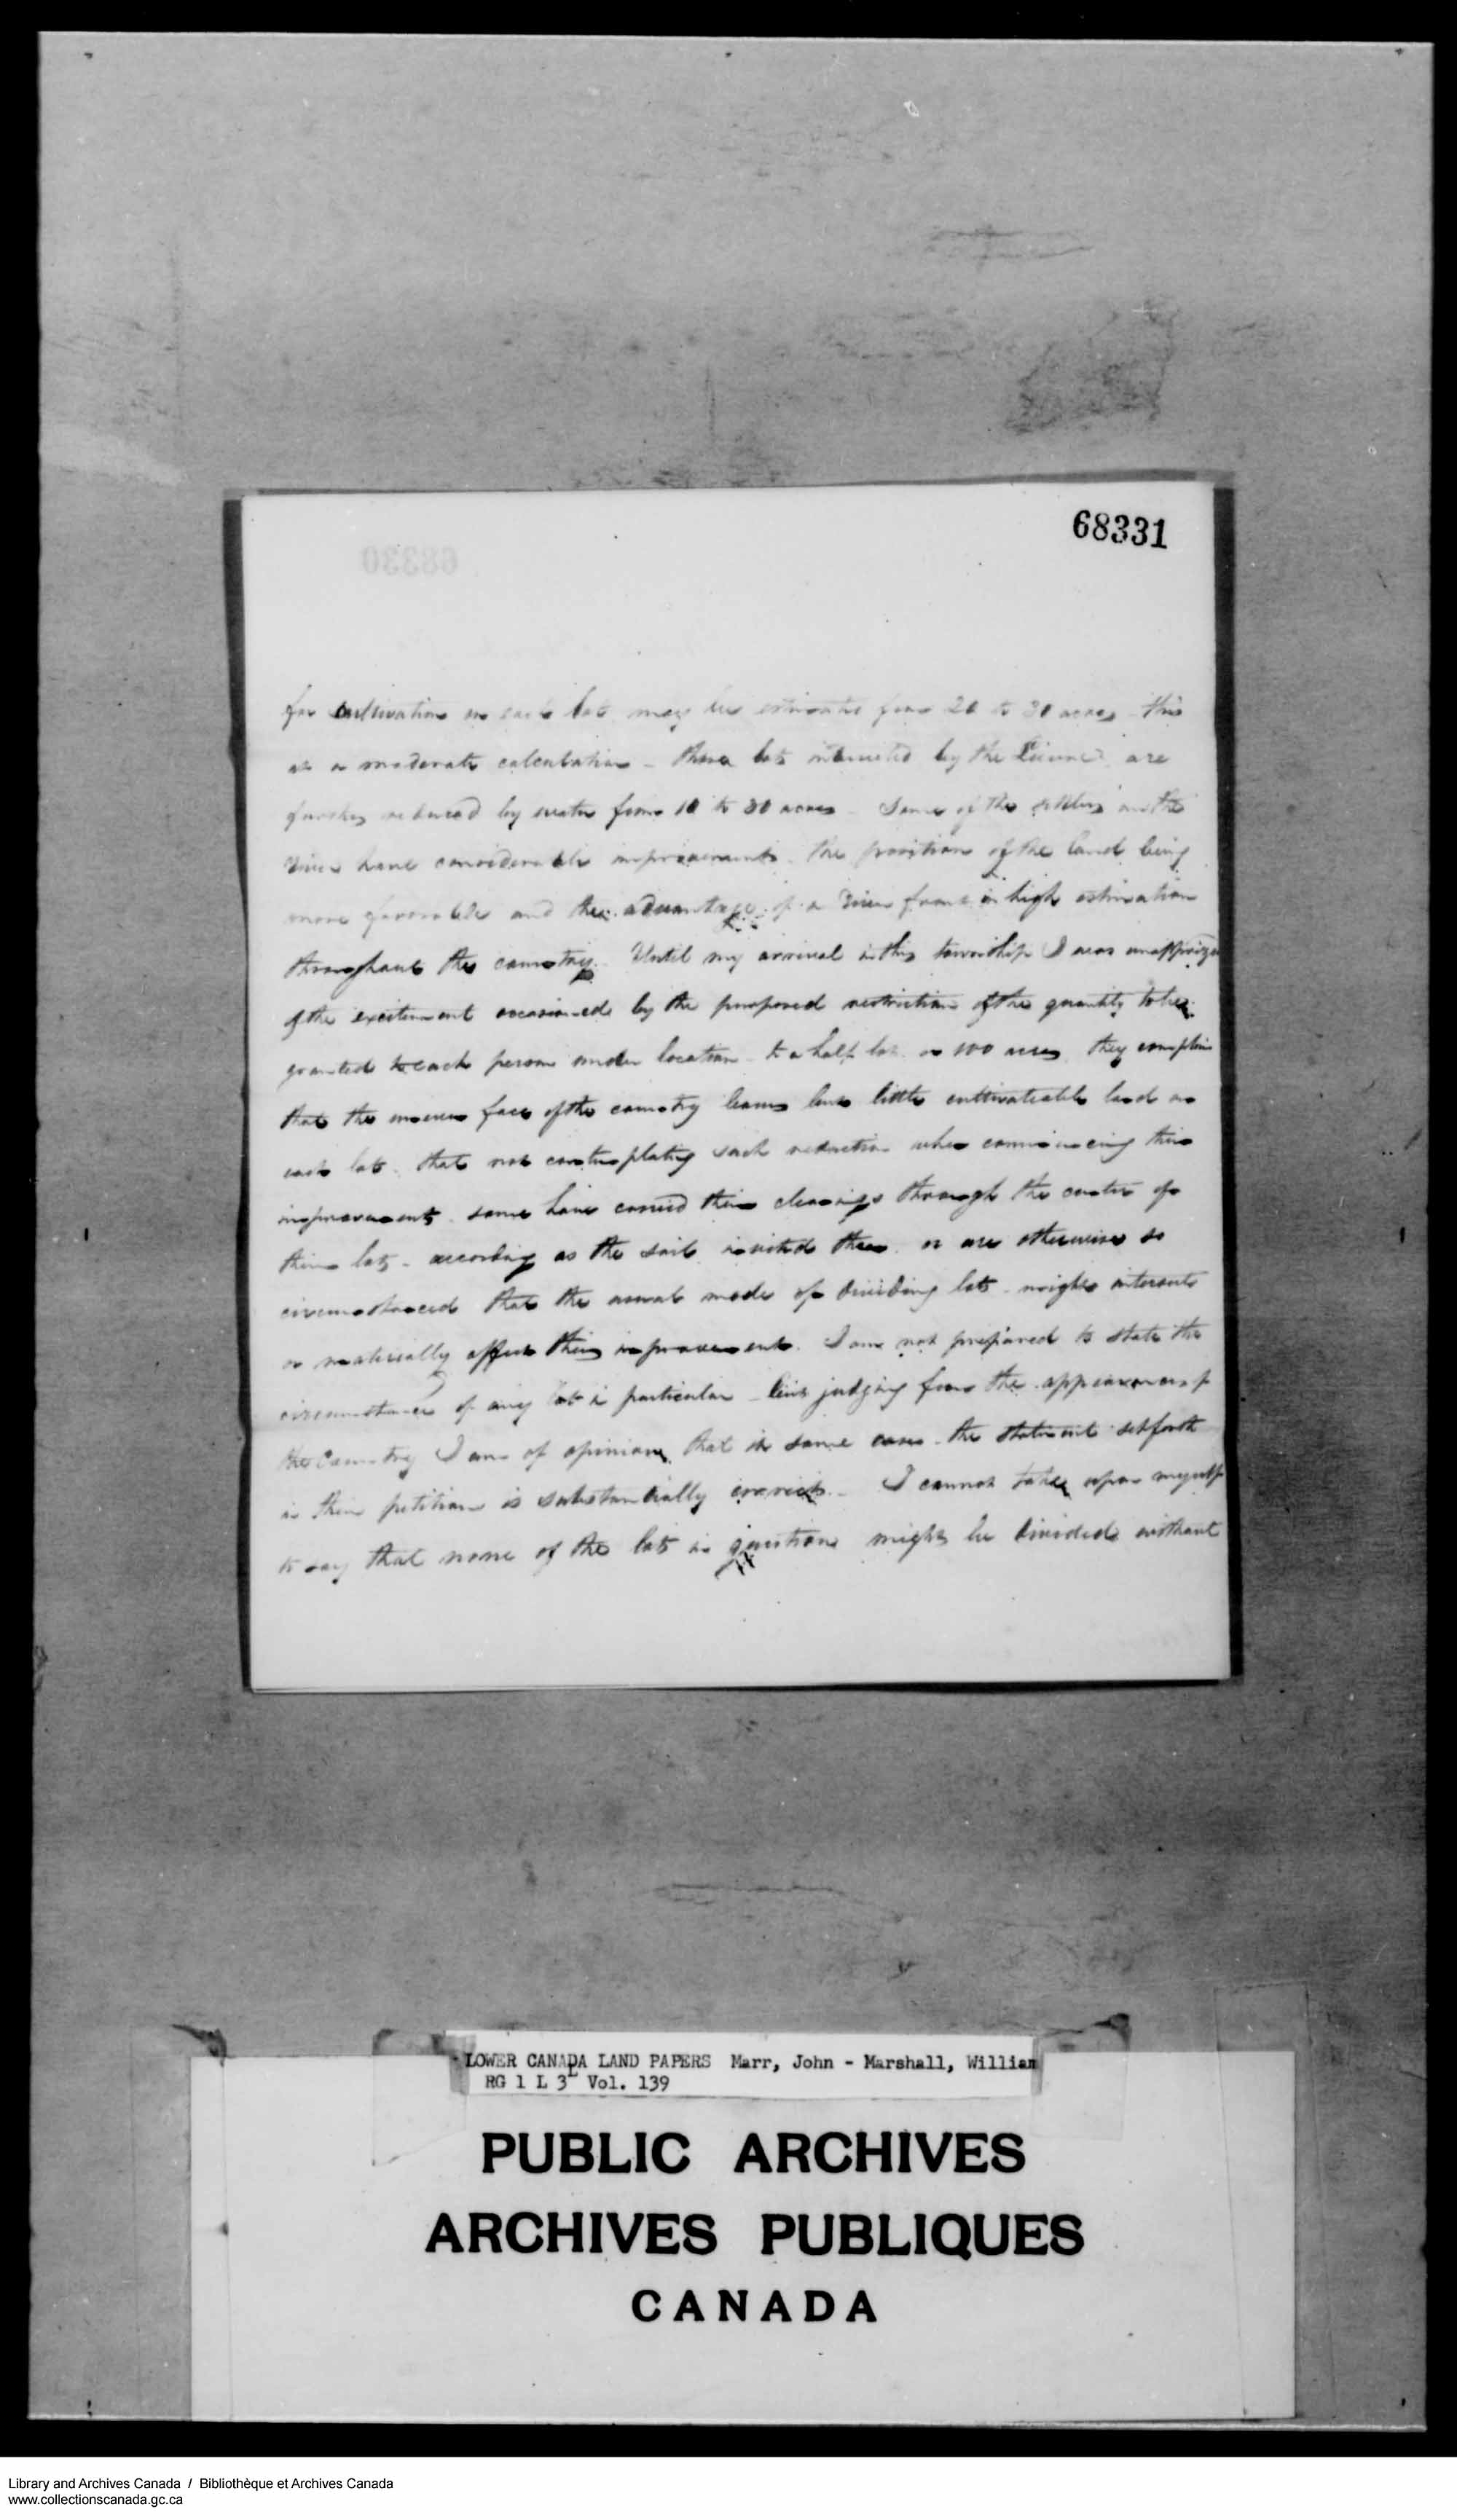 Digitized page of  for Image No.: e008713587